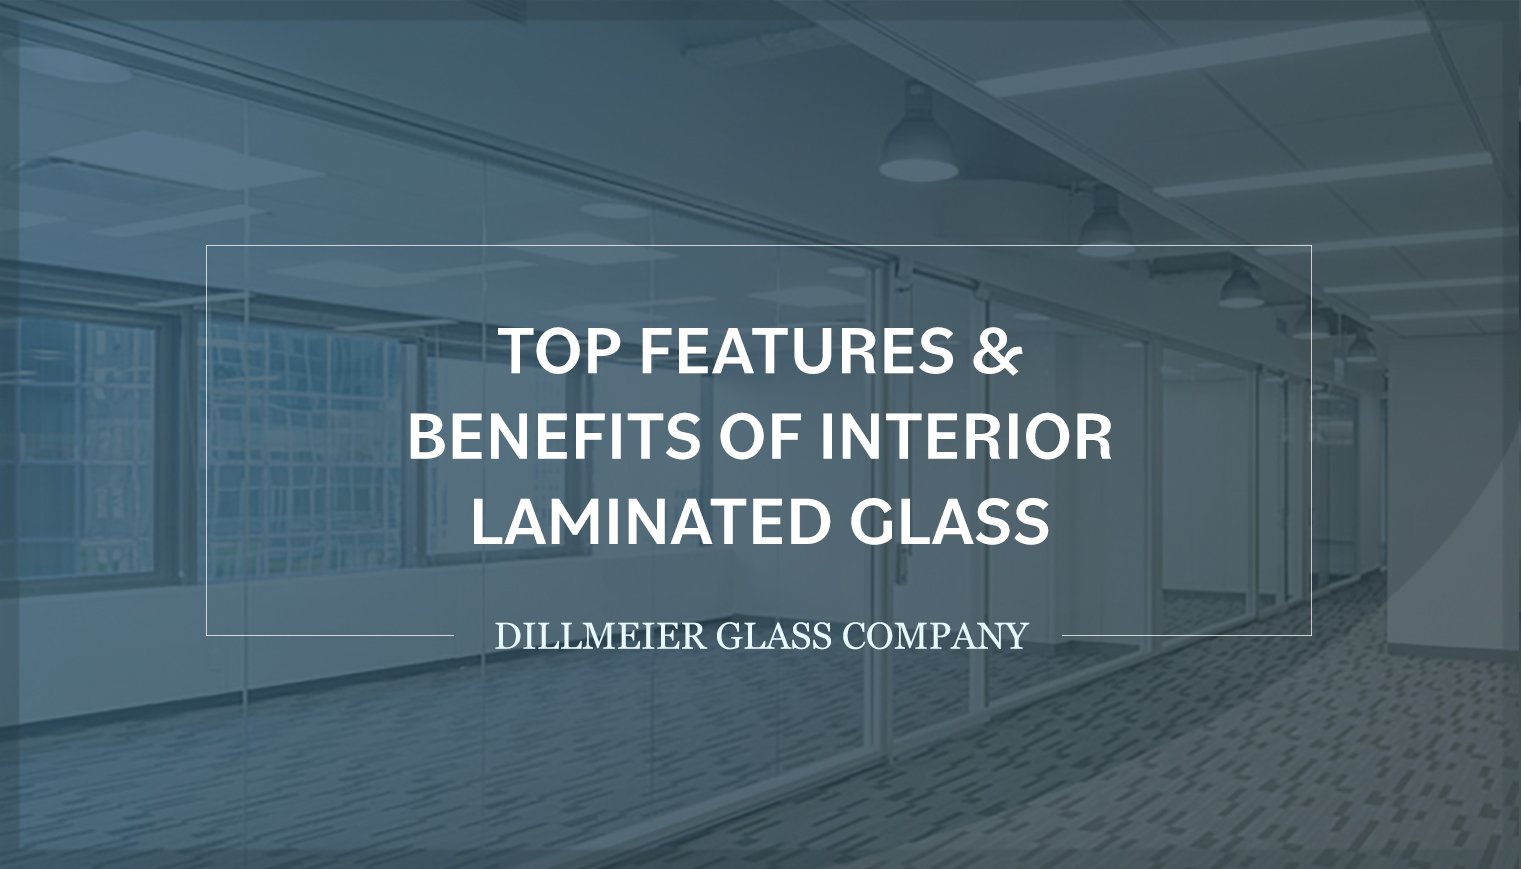 Top Features & Benefits of Interior Laminated Glass